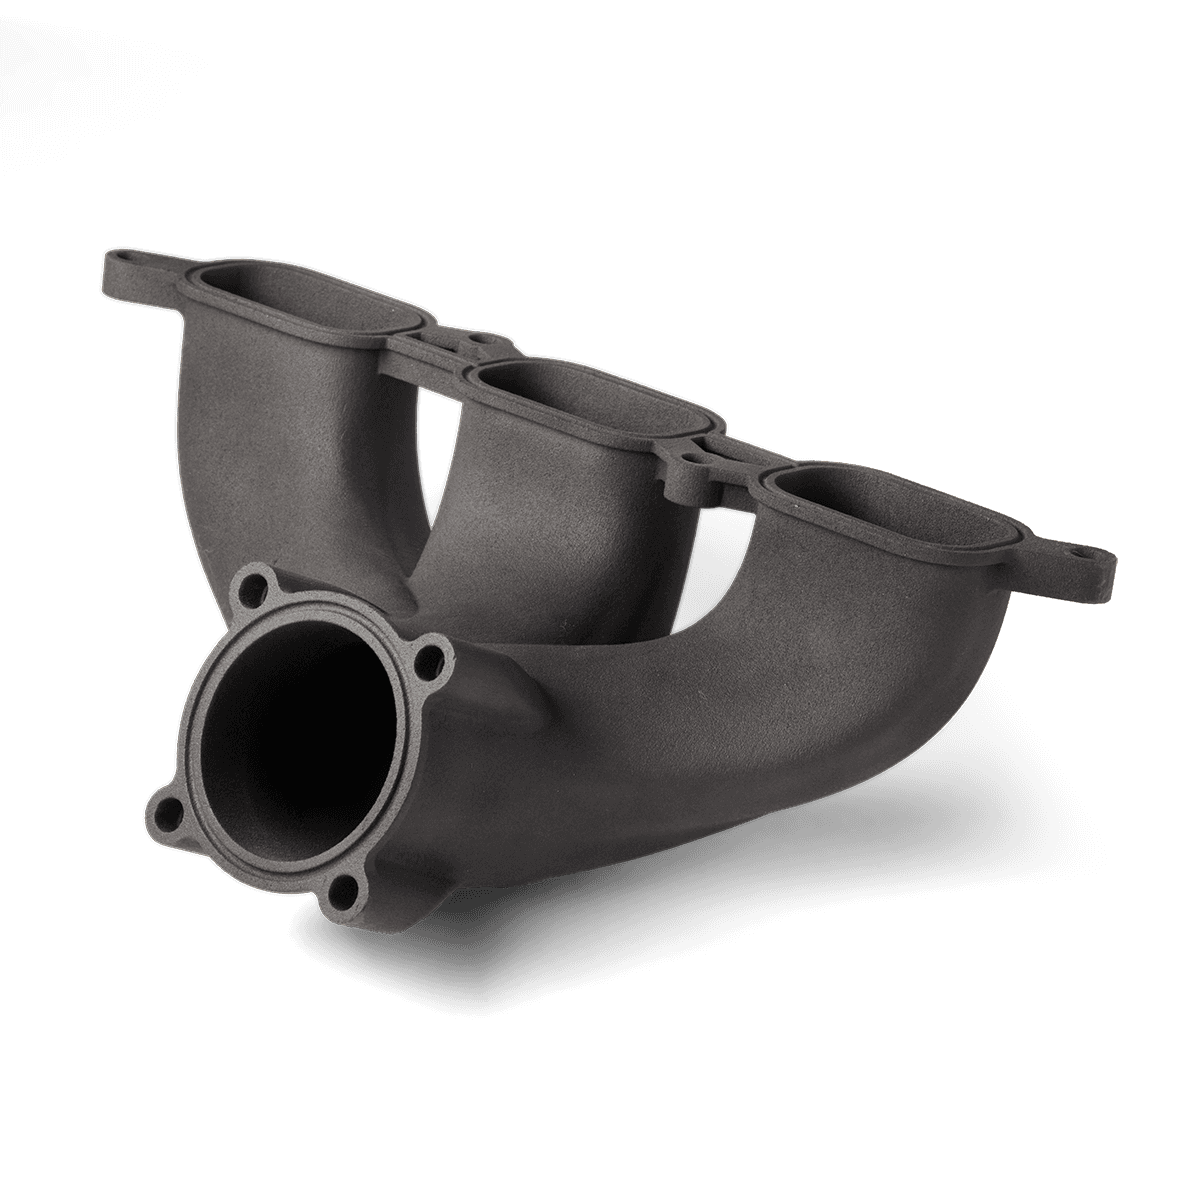 3D printed intake manifold for a 3-cylinder engine